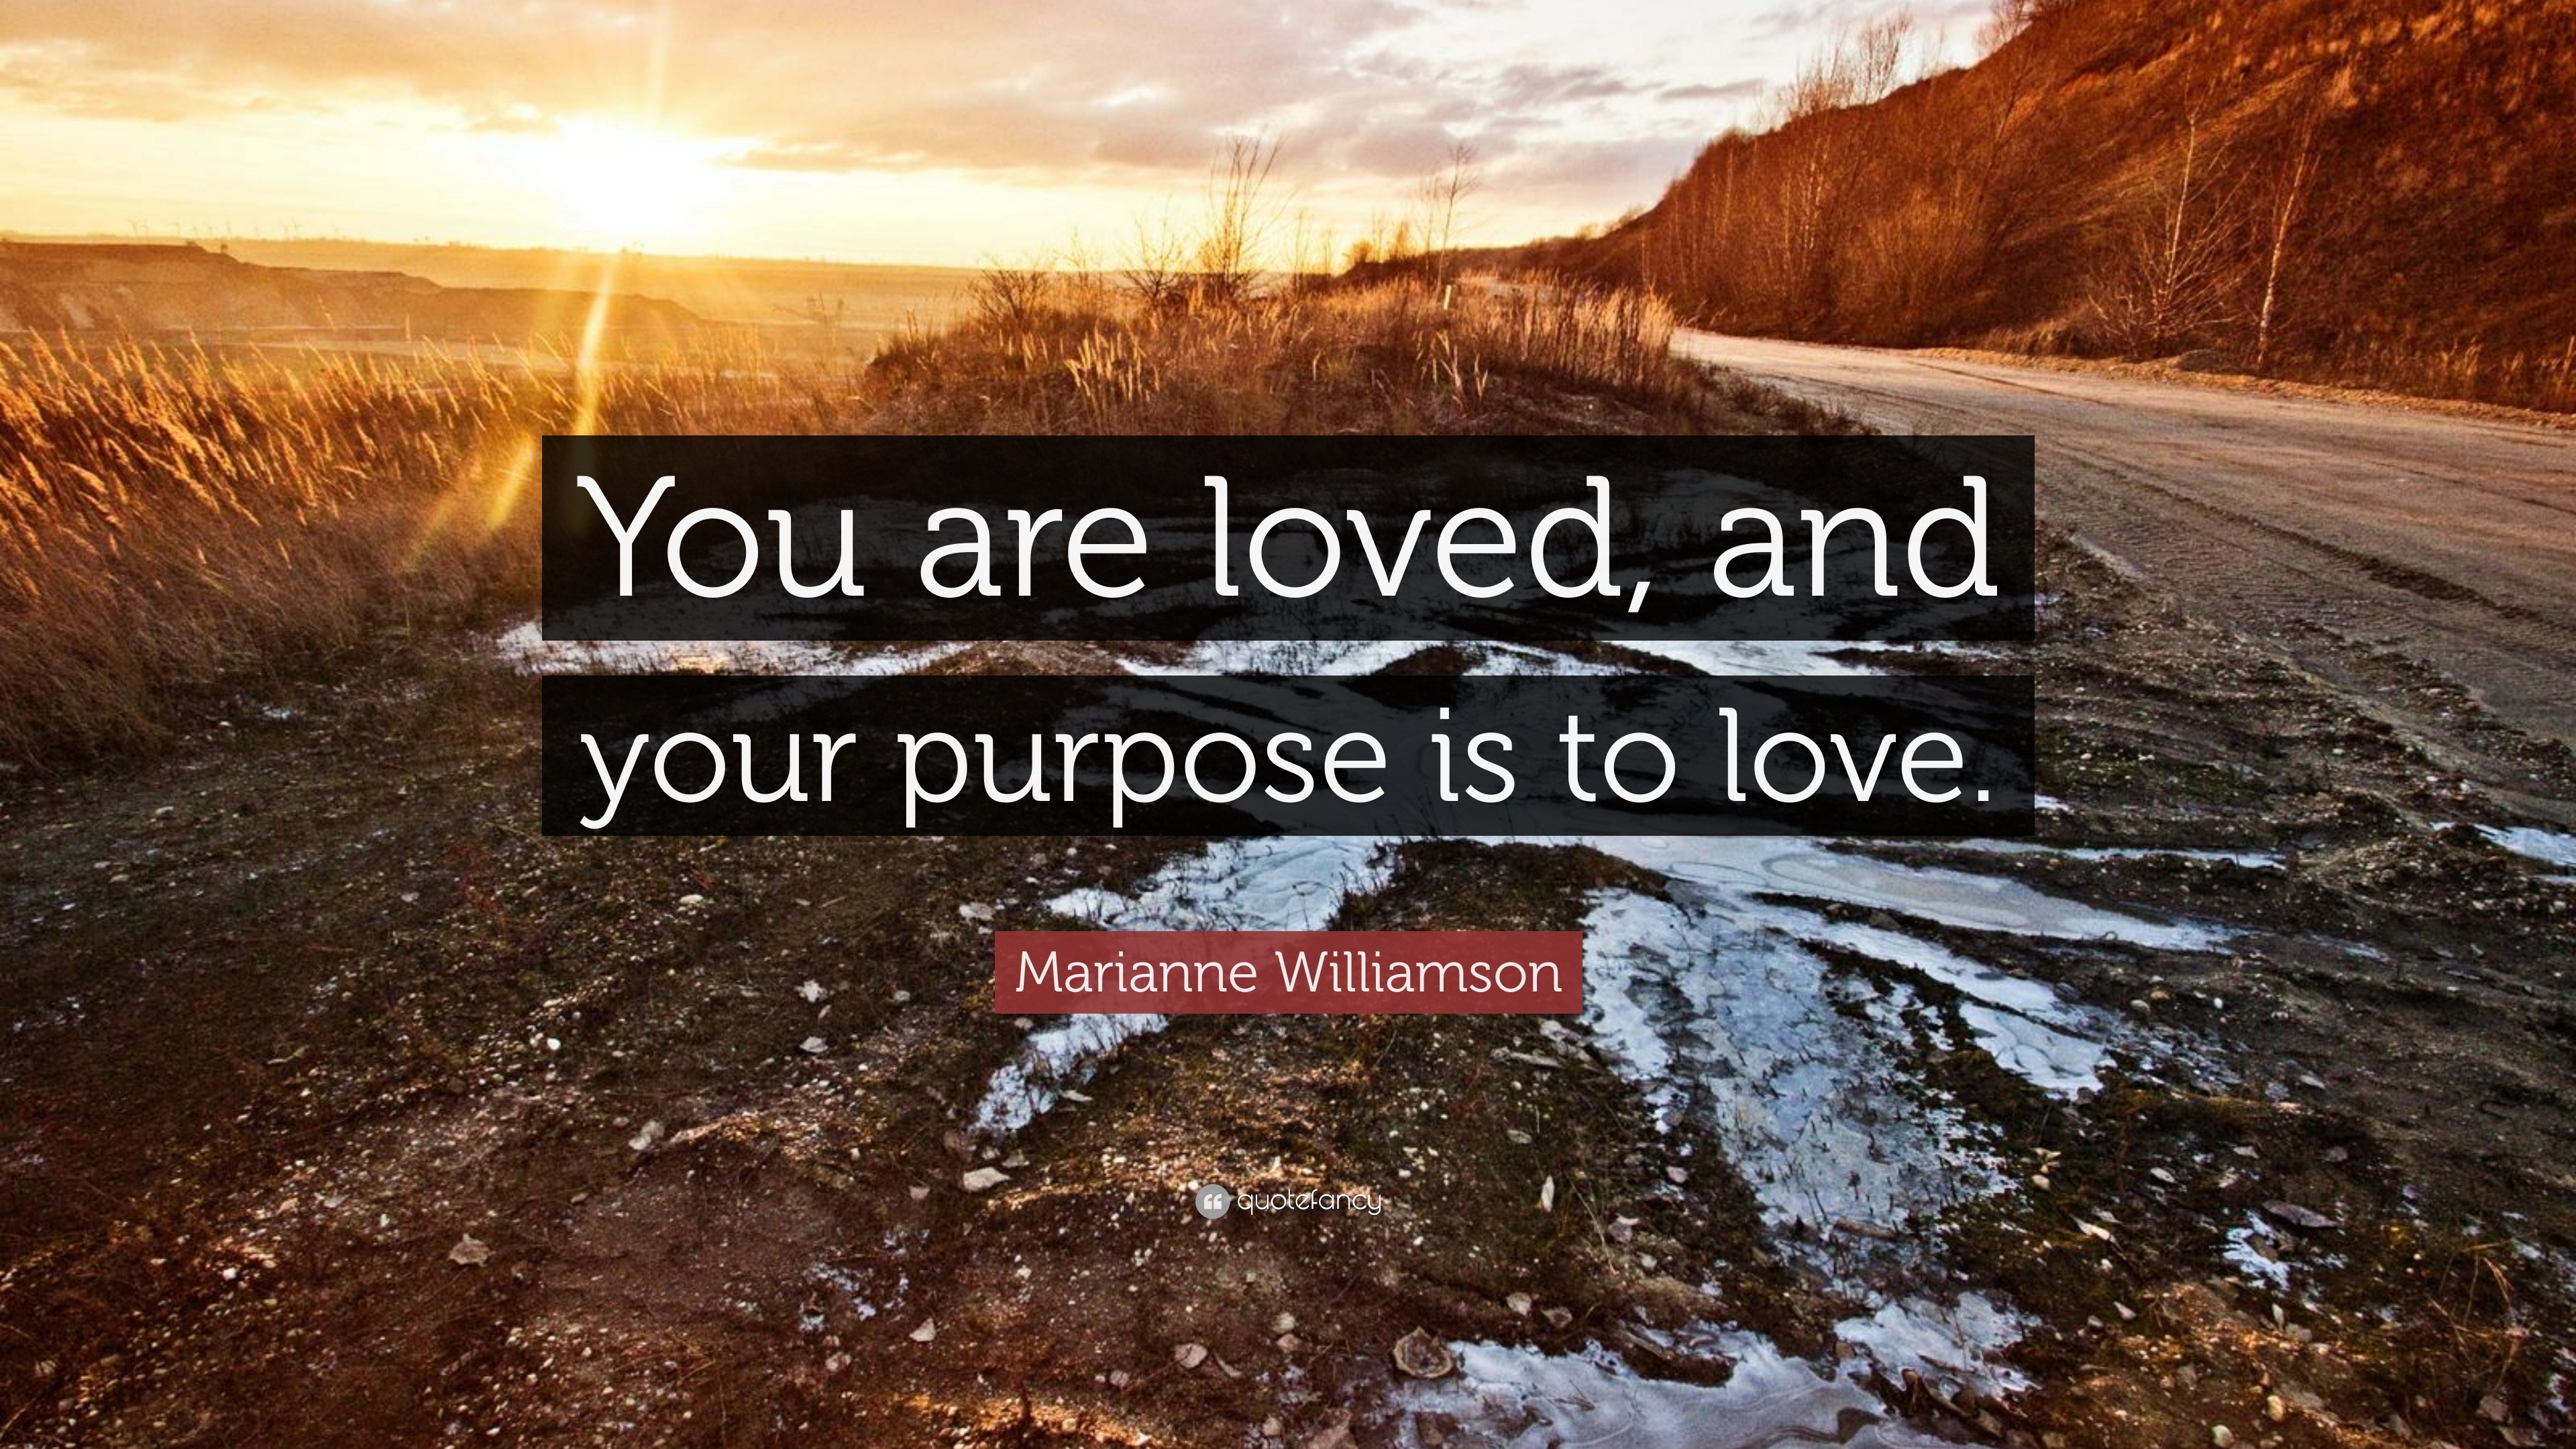 Marianne Williamson Quote: “You are loved, and your purpose is to love.”